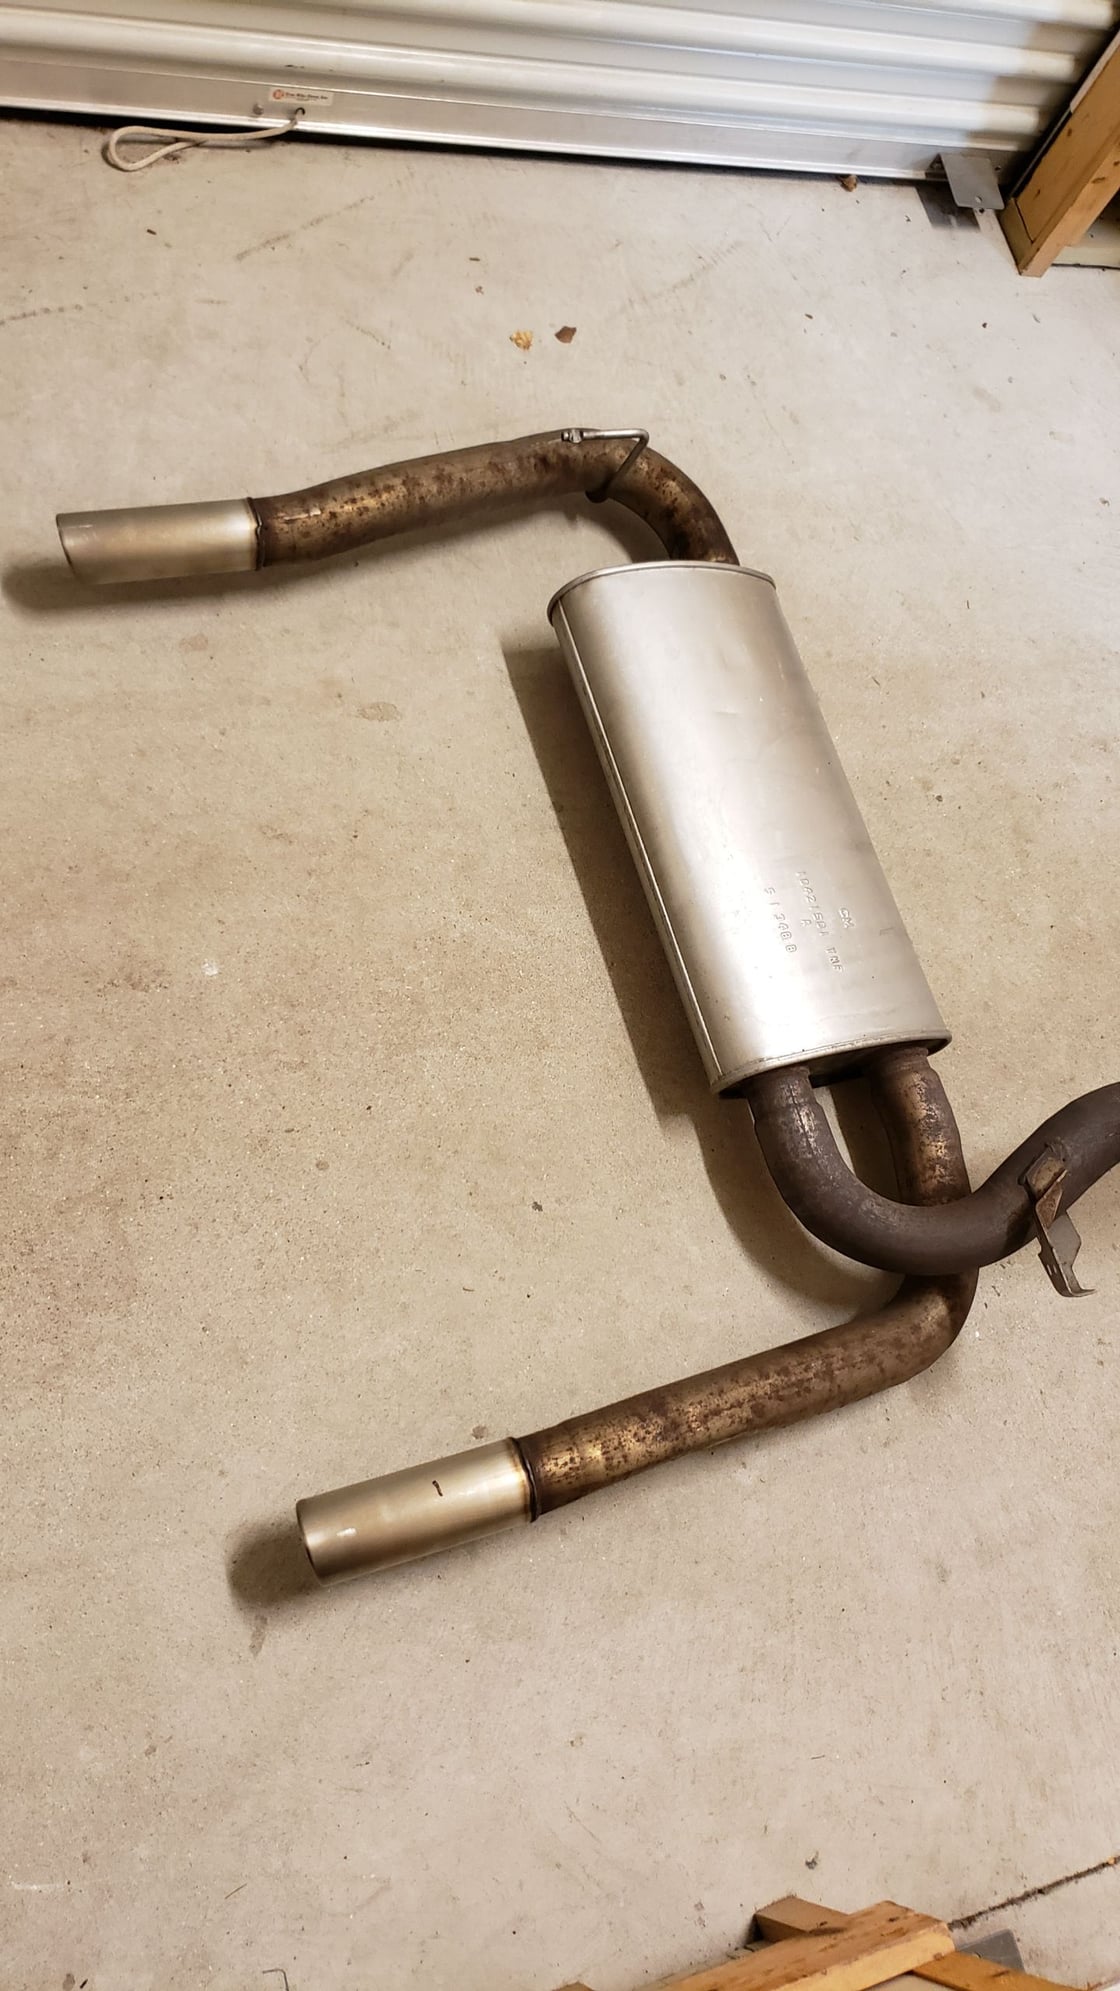  - 98-02 F-Body STOCK/FACTORY UNCUT Catback exhaust - Germantown, WI 53022, United States